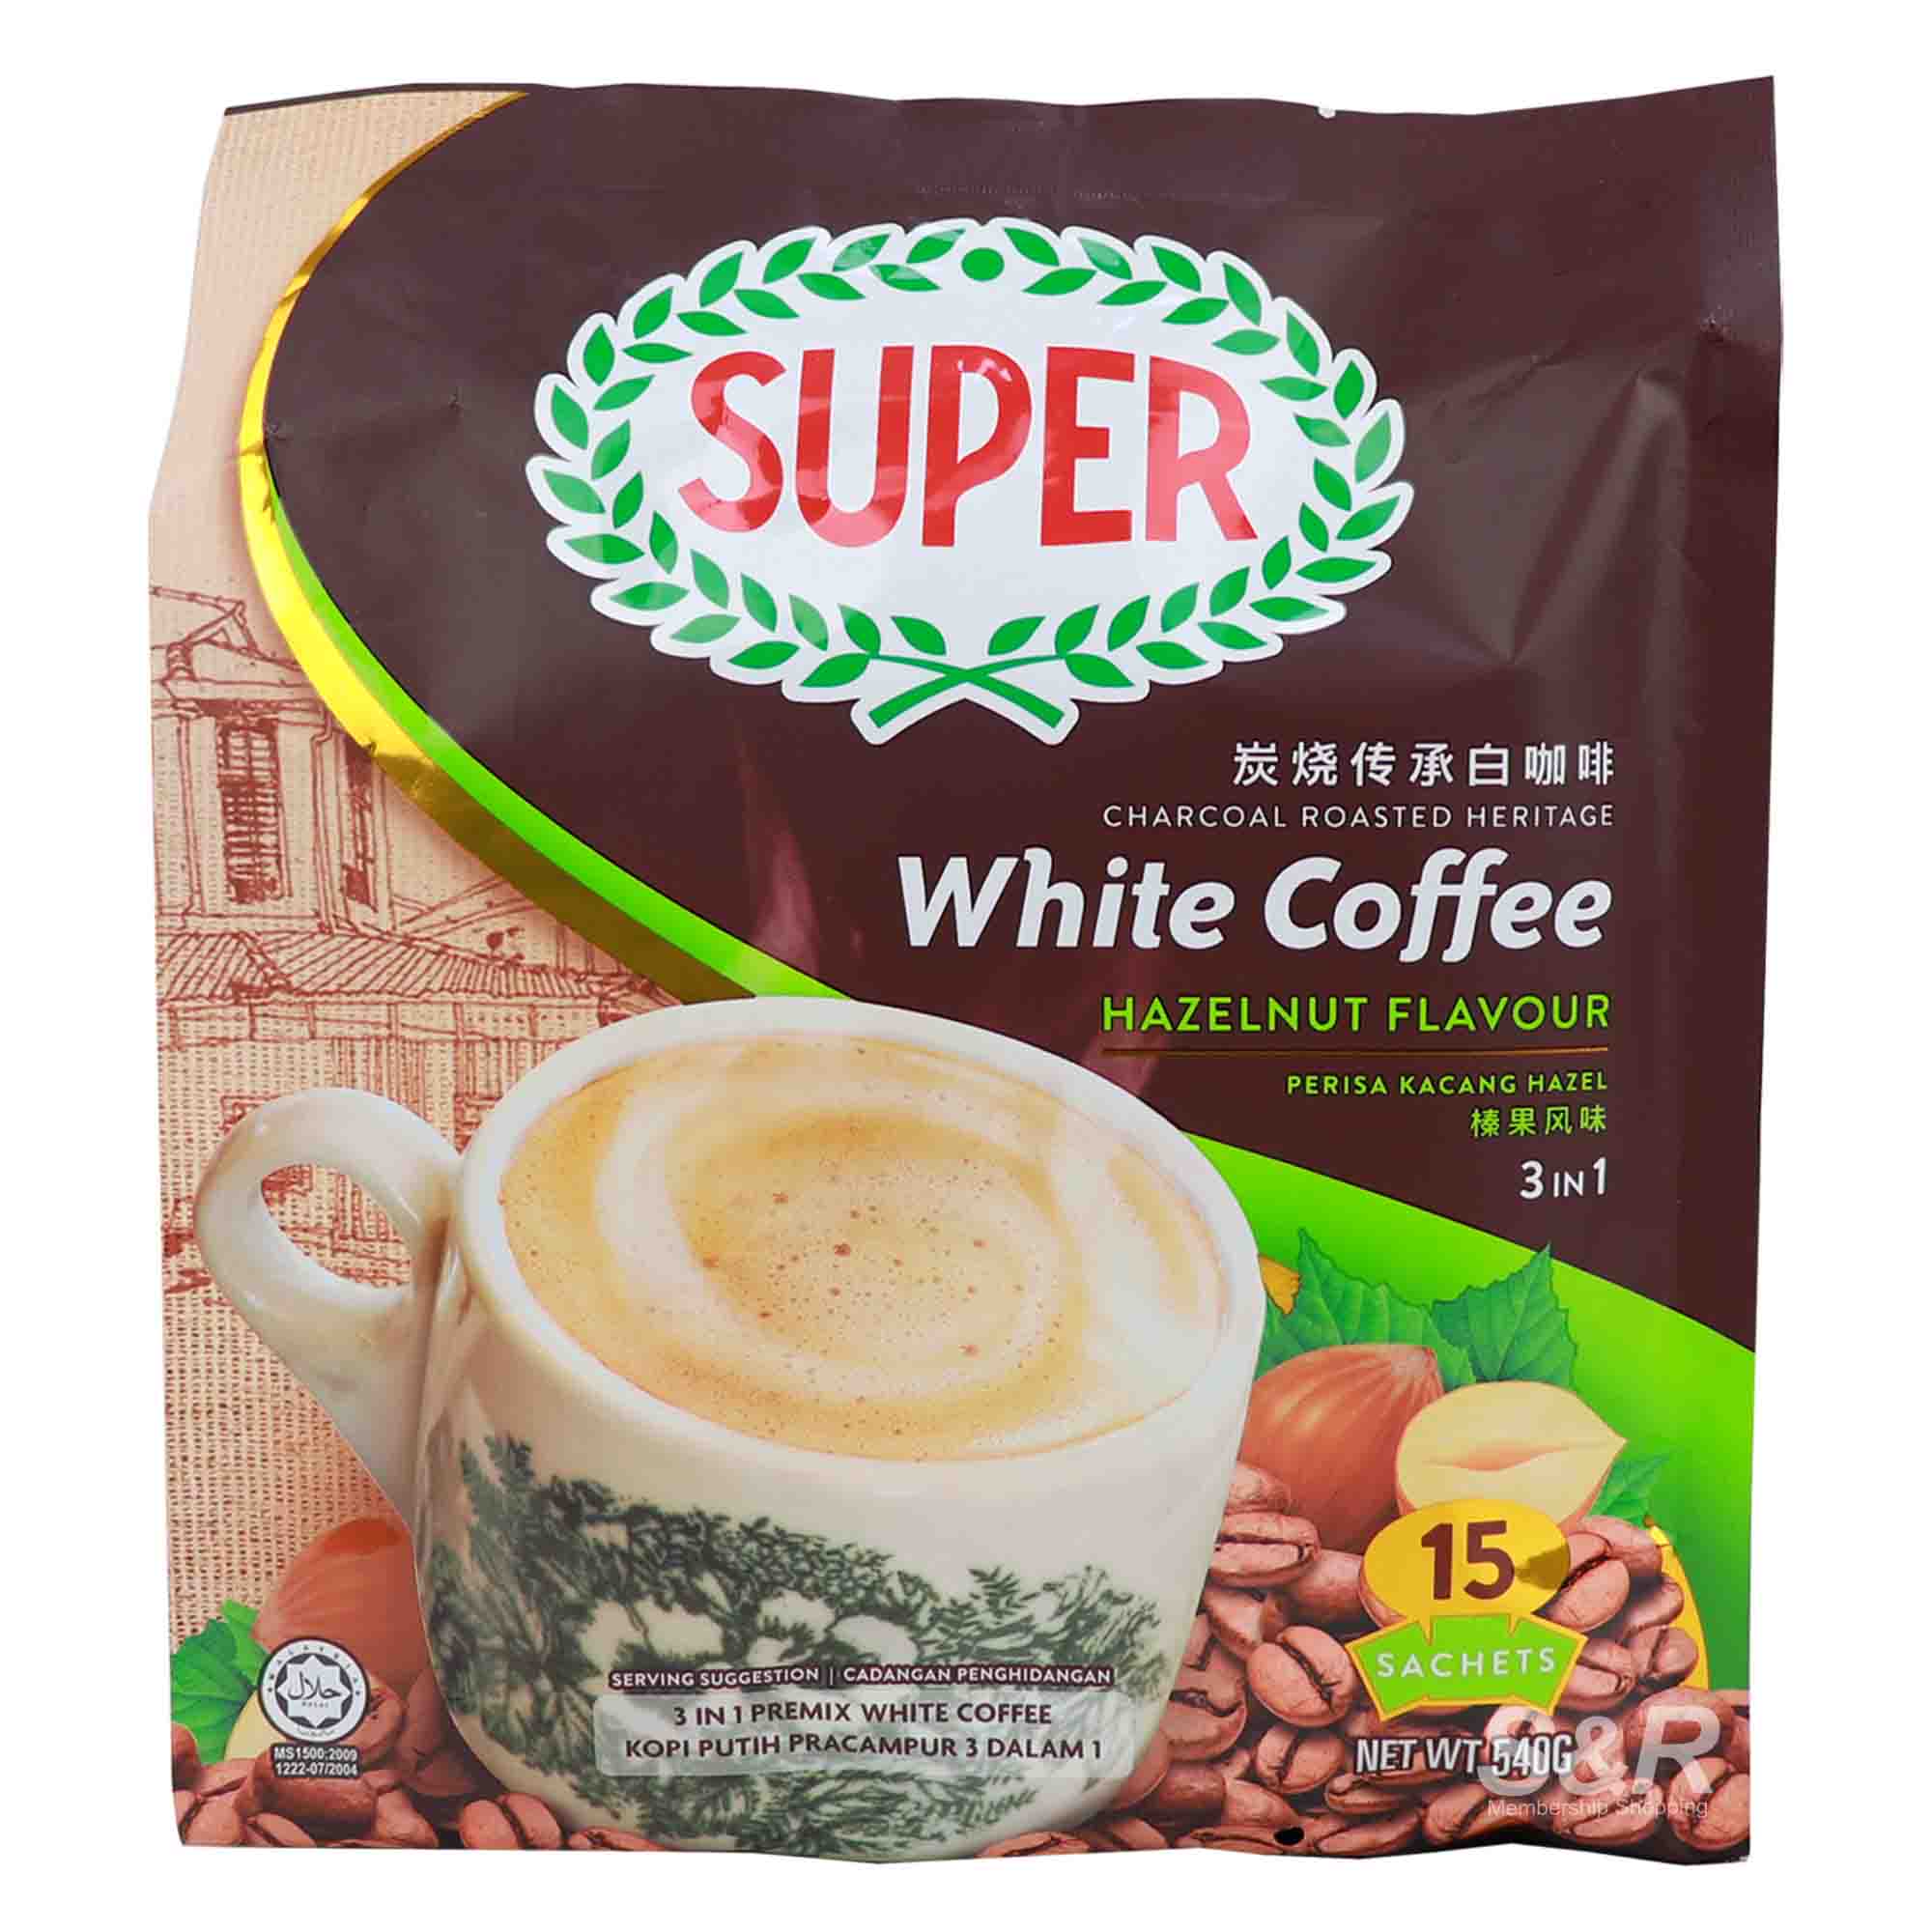 Super 3-in-1 Charcoal Roasted Heritage White Coffee Hazelnut Flavor 15 sachets